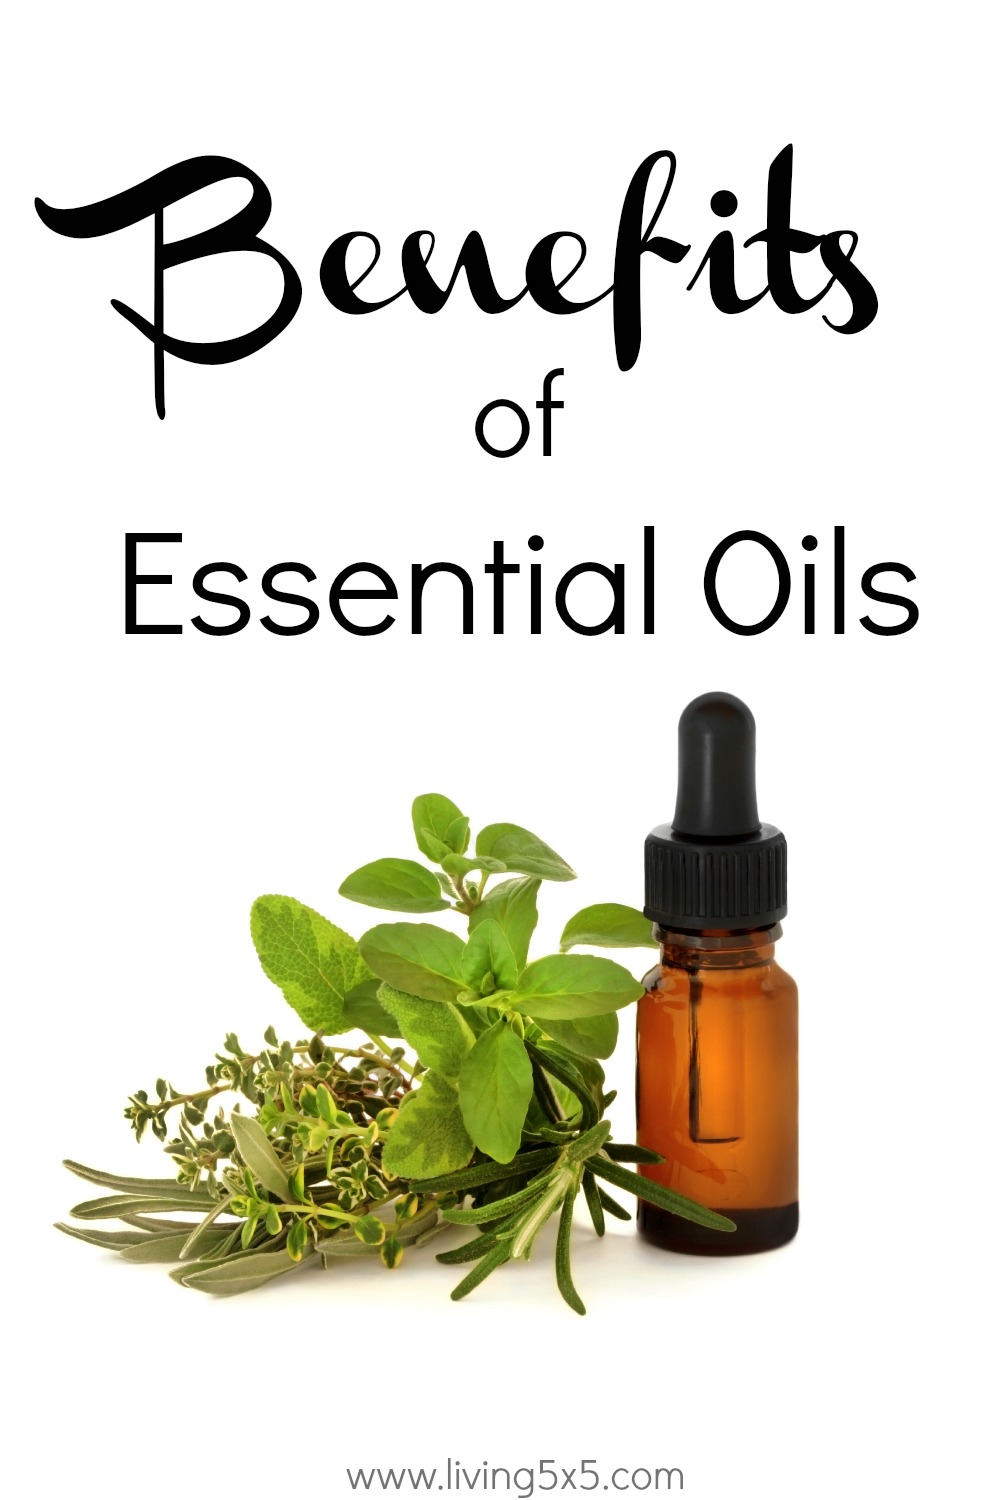 What are the benefits of essential oils? They are extracted from plants via distillation. The oil is highly concentrated and has many therapeutic benefits. 